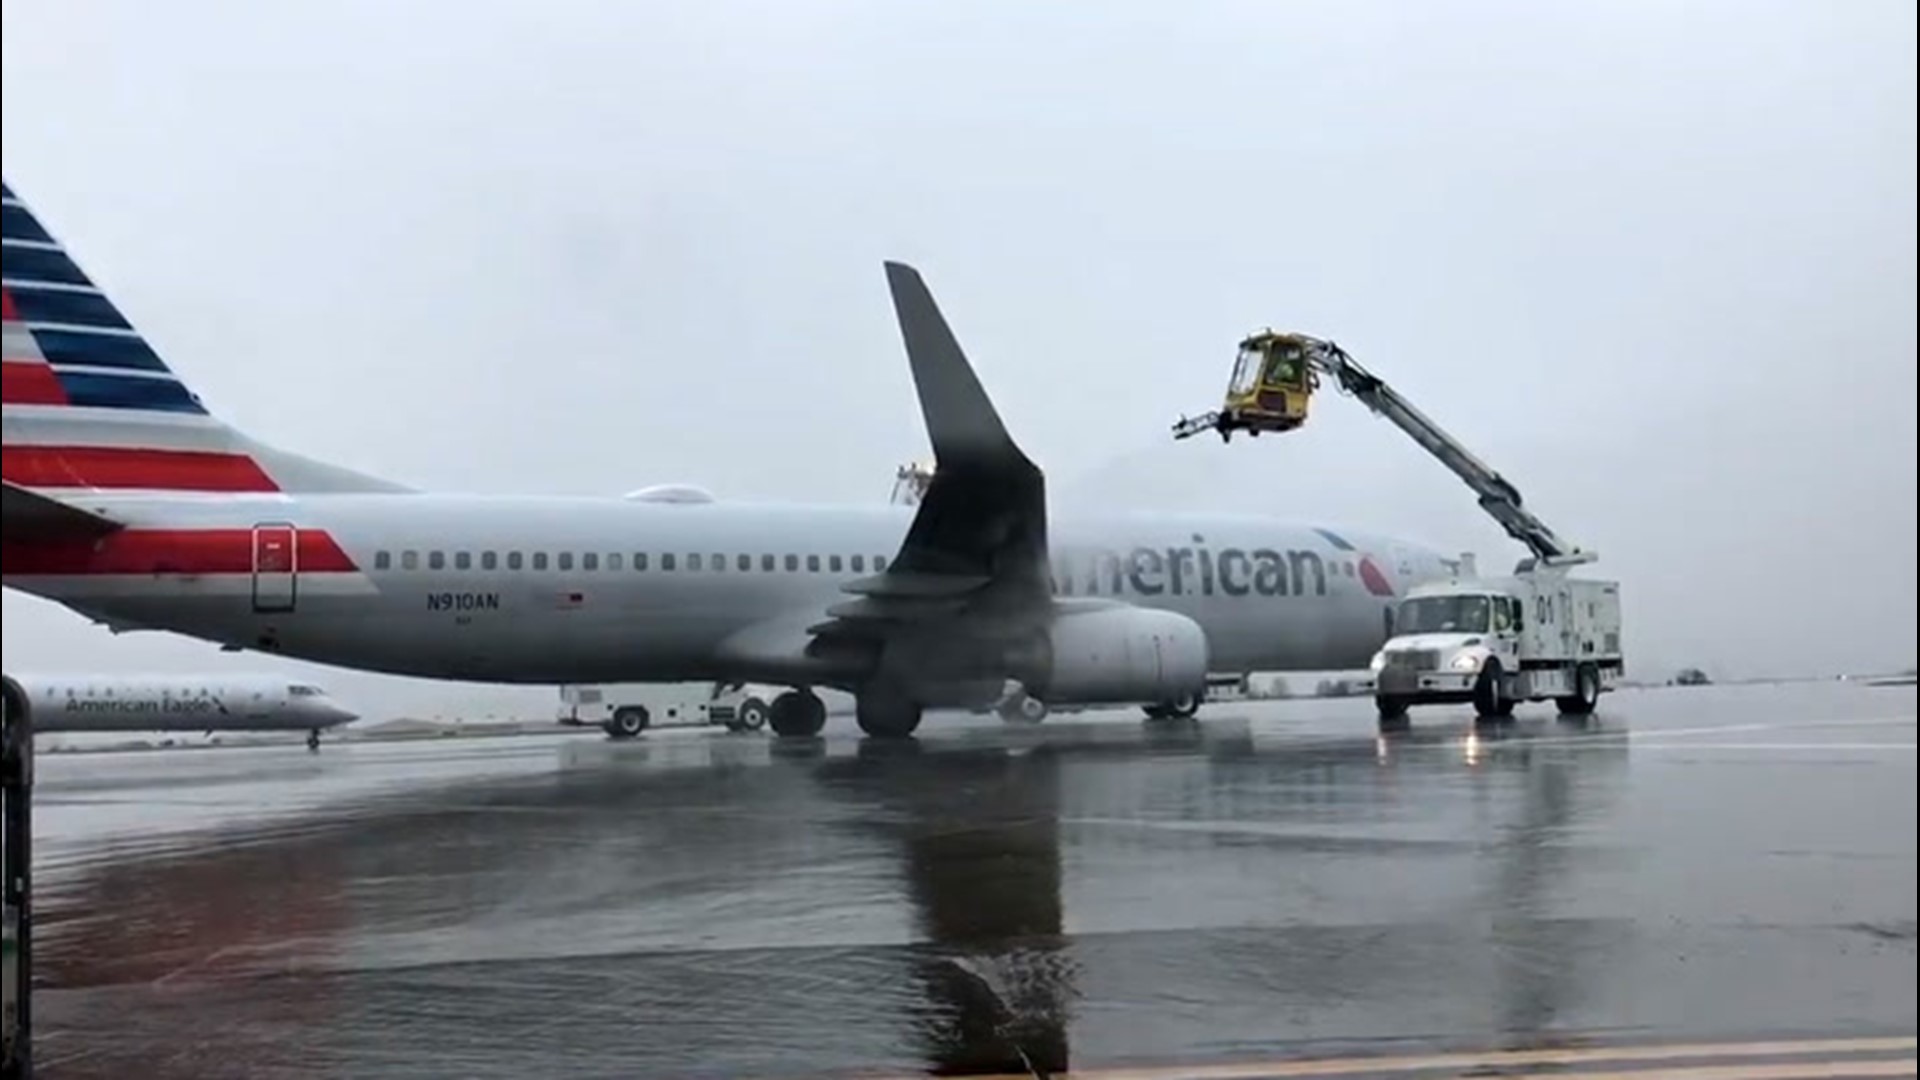 Planes at the Charlotte Douglas International Airport in North Carolina are getting defrosted due to winter weather on Feb. 20.